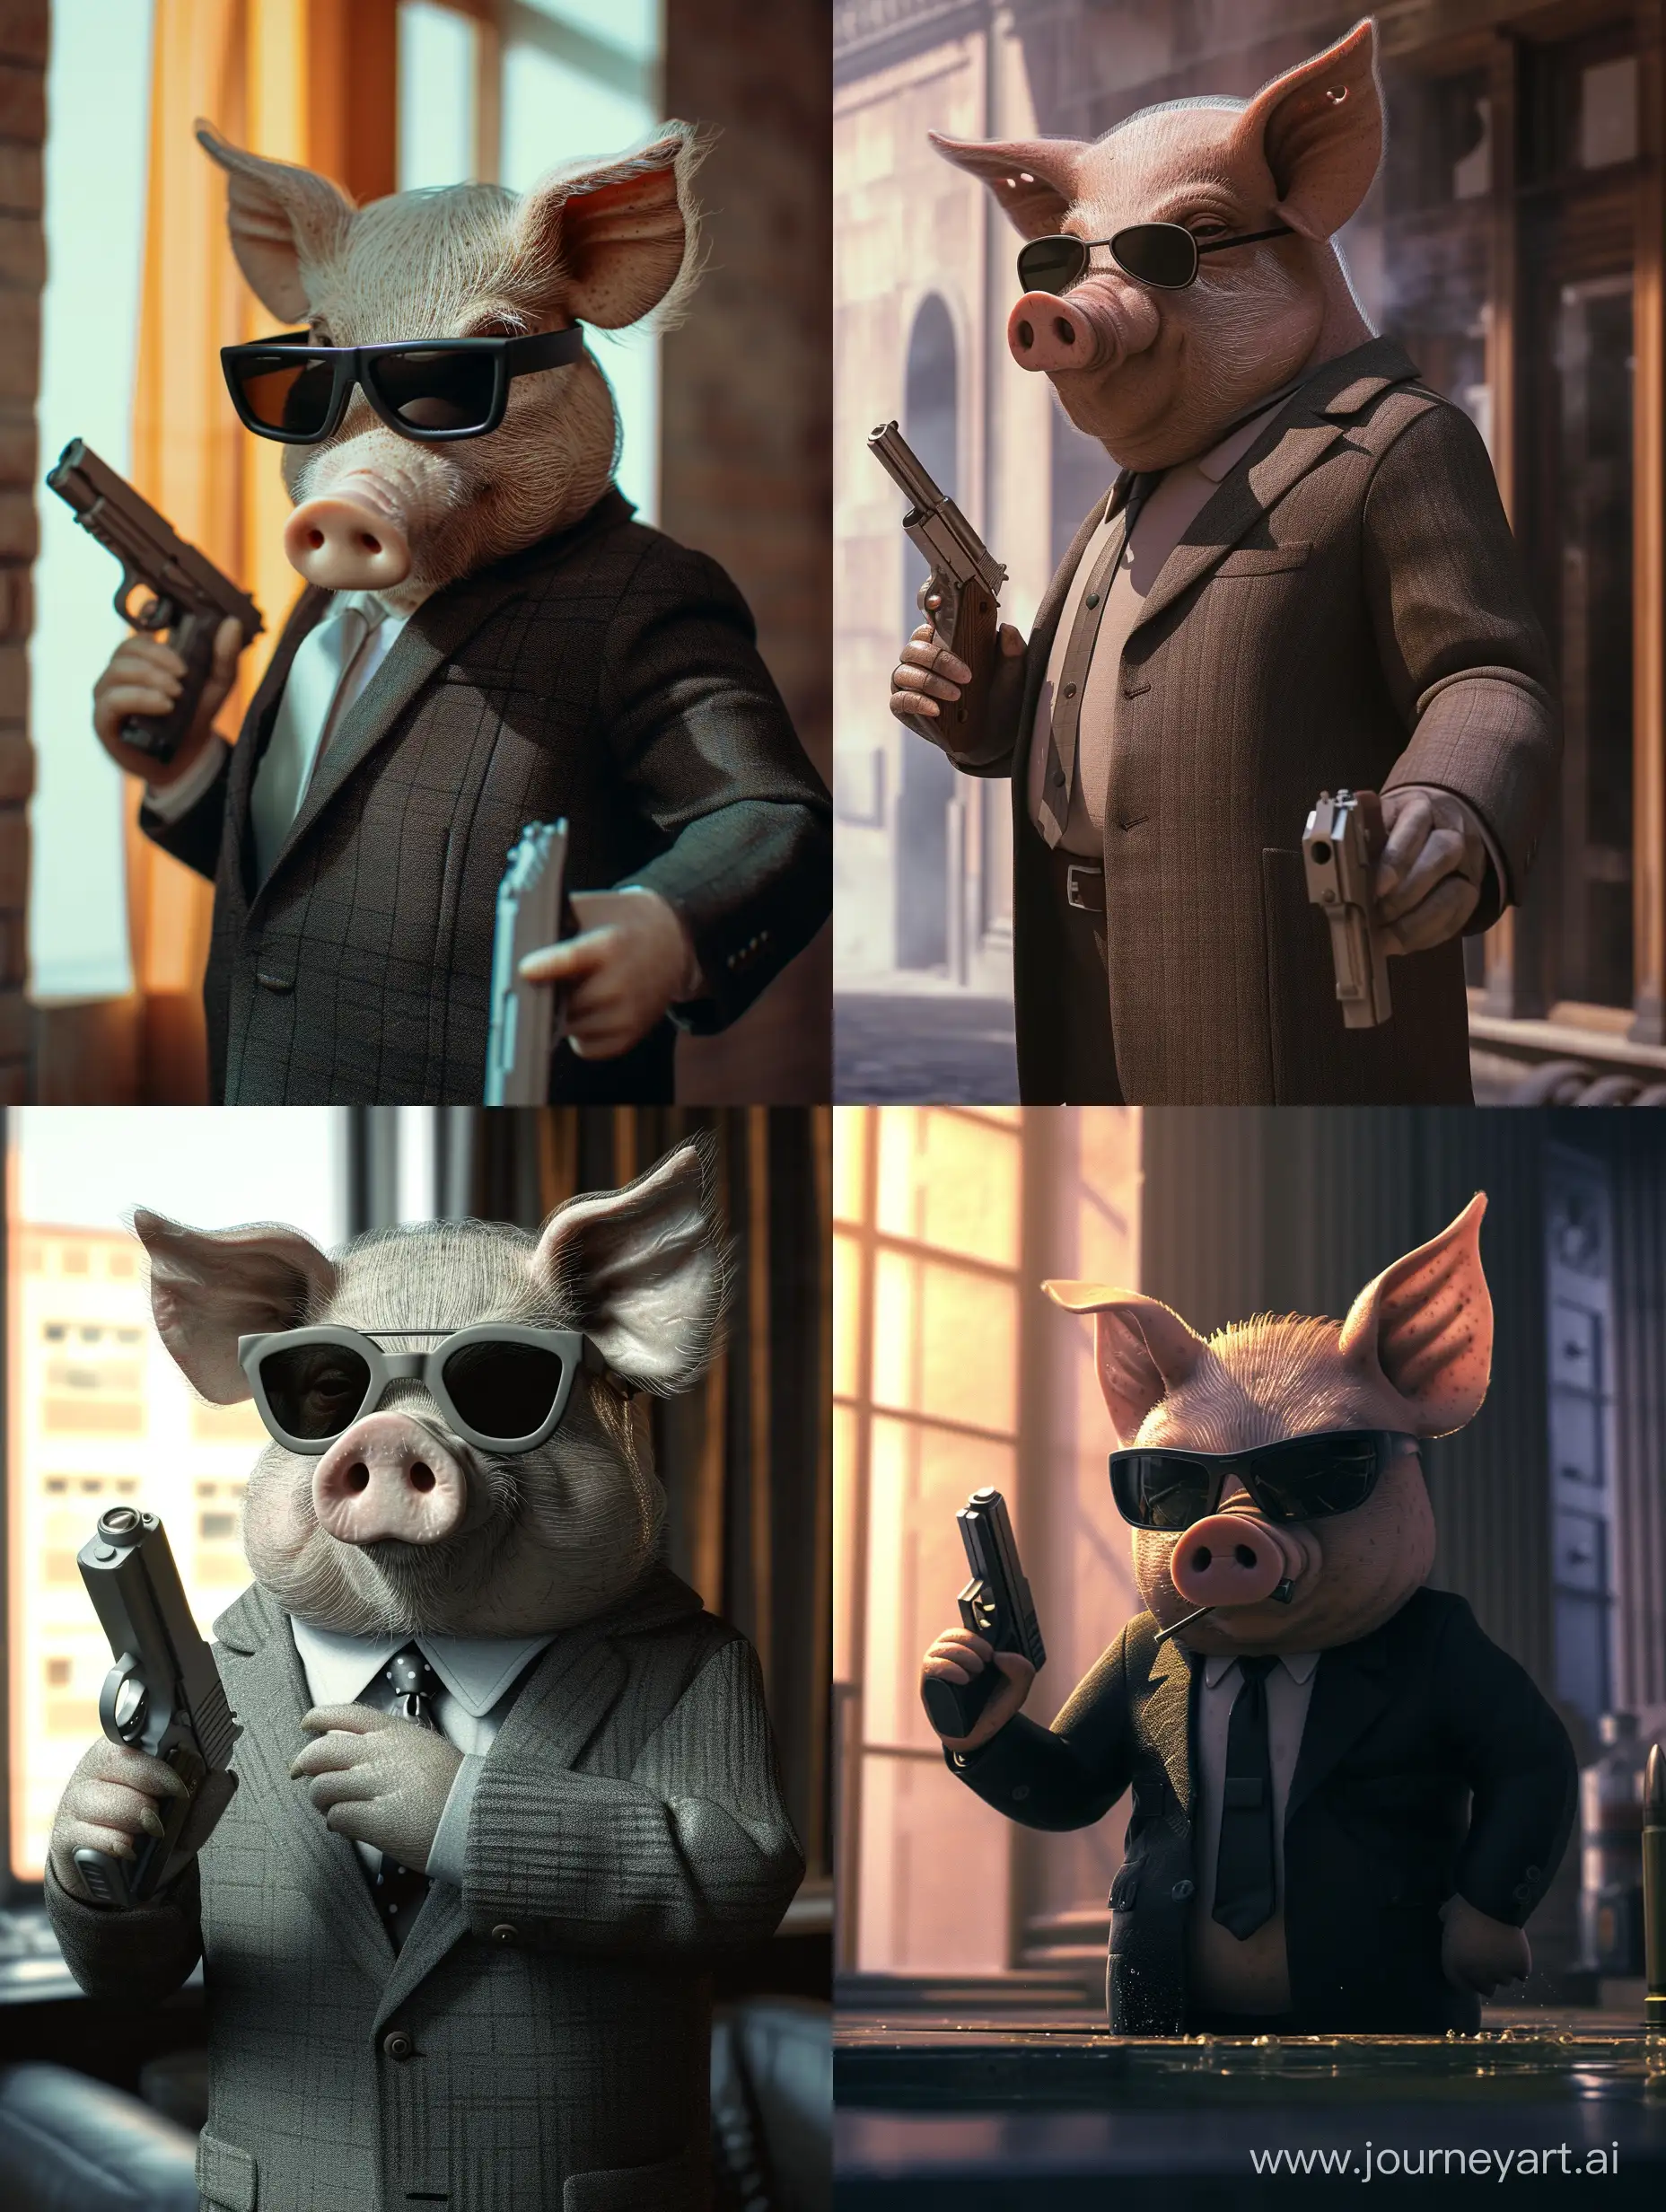 Sleek-Spy-Pig-in-Sunglasses-with-Gun-in-Real-Environment